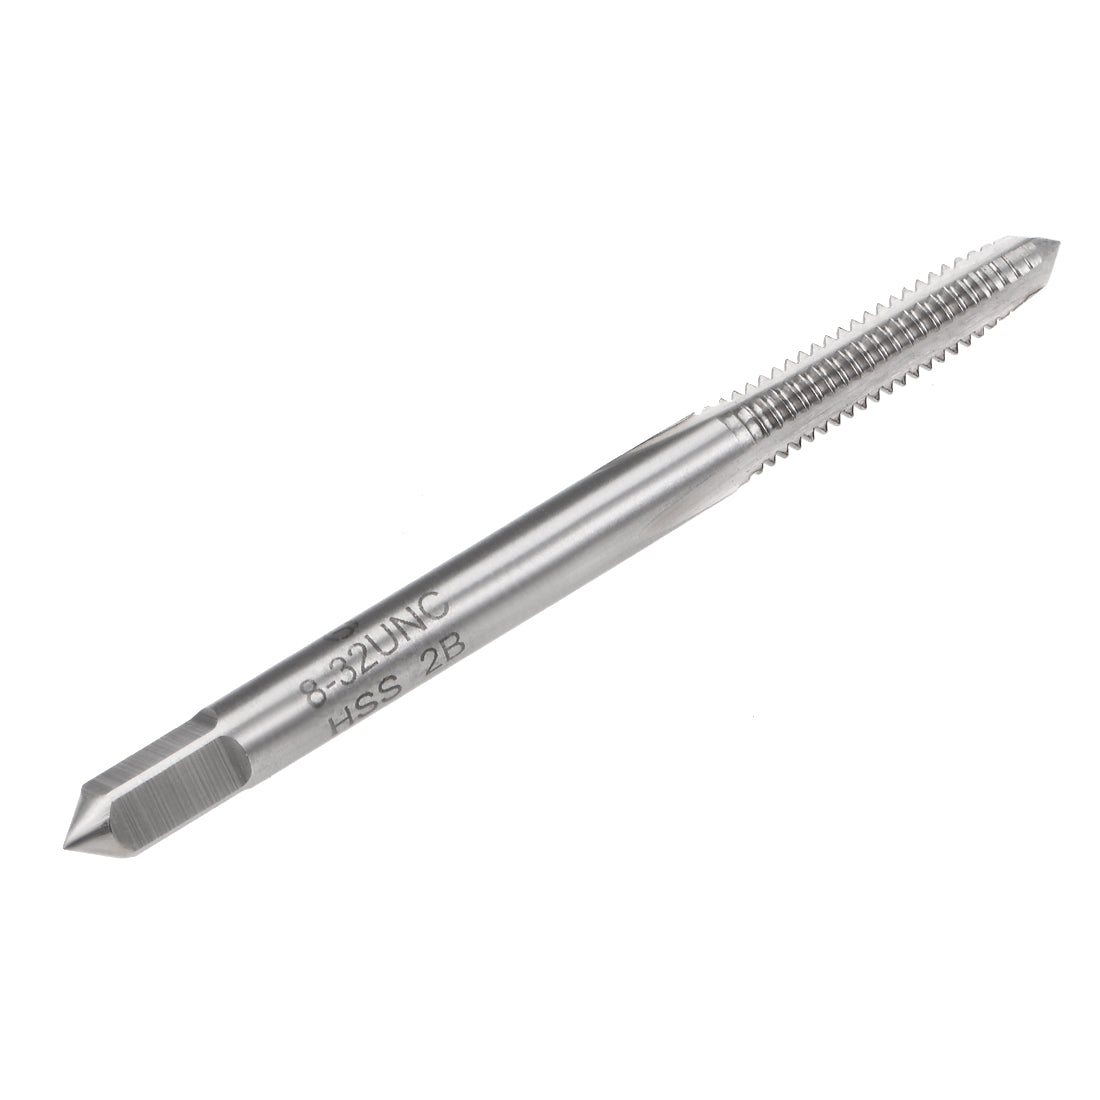 Uxcell Uxcell Machine Tap 12-24UNC Thread Pitch 2B Class 3 Flutes High Speed Steel